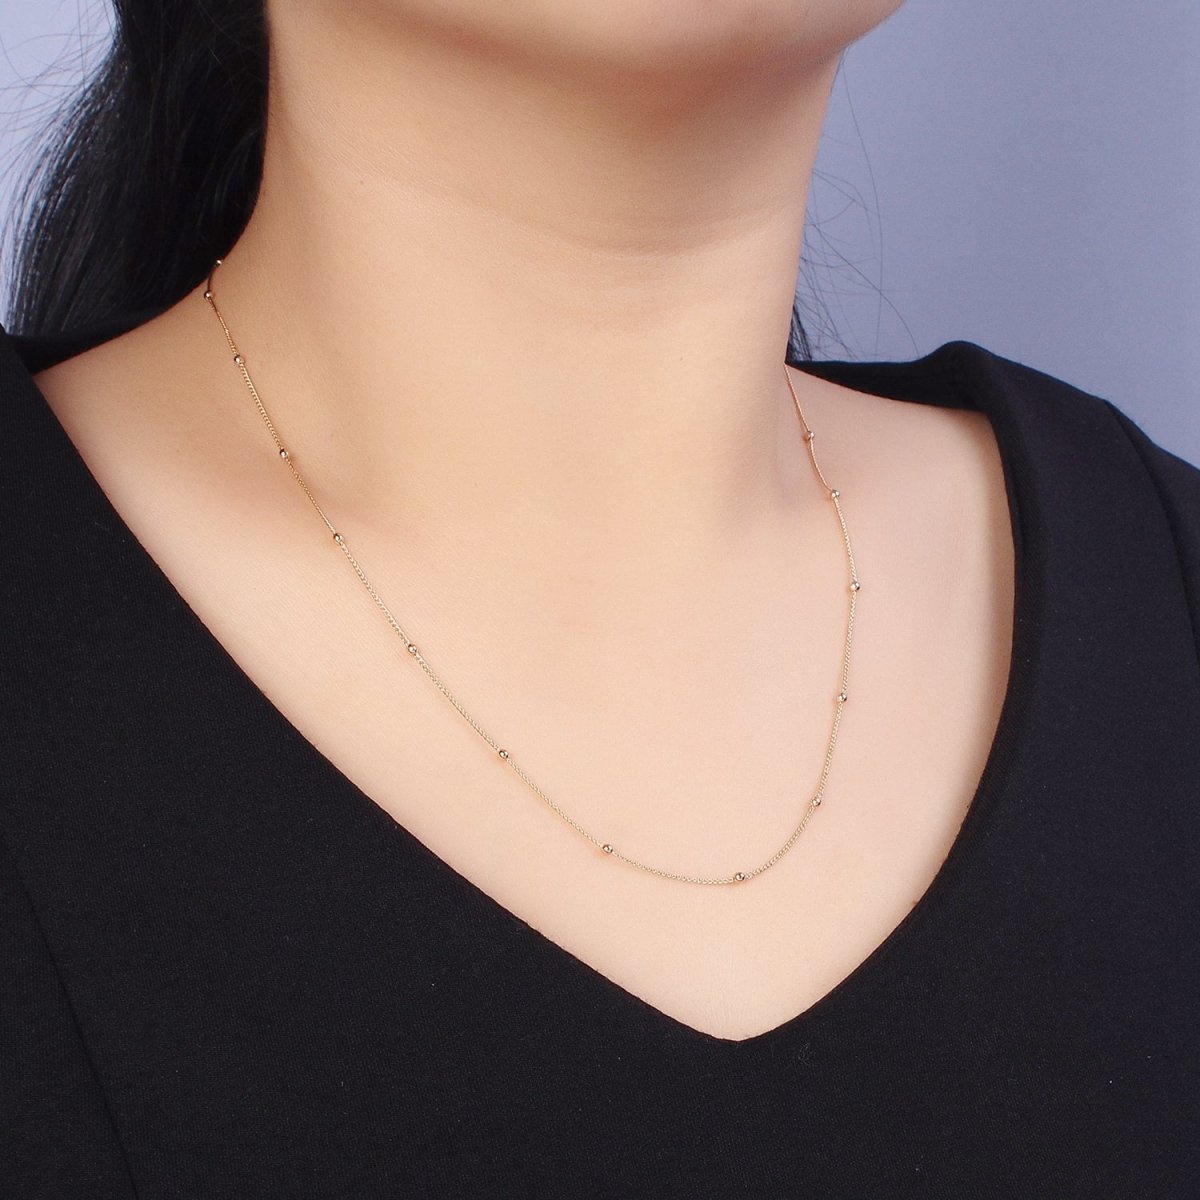 19.5 Inch Satellite Chain 18K Gold Filled Dainty Ball Link Chain Necklace | WA-1604 Clearance Pricing - DLUXCA